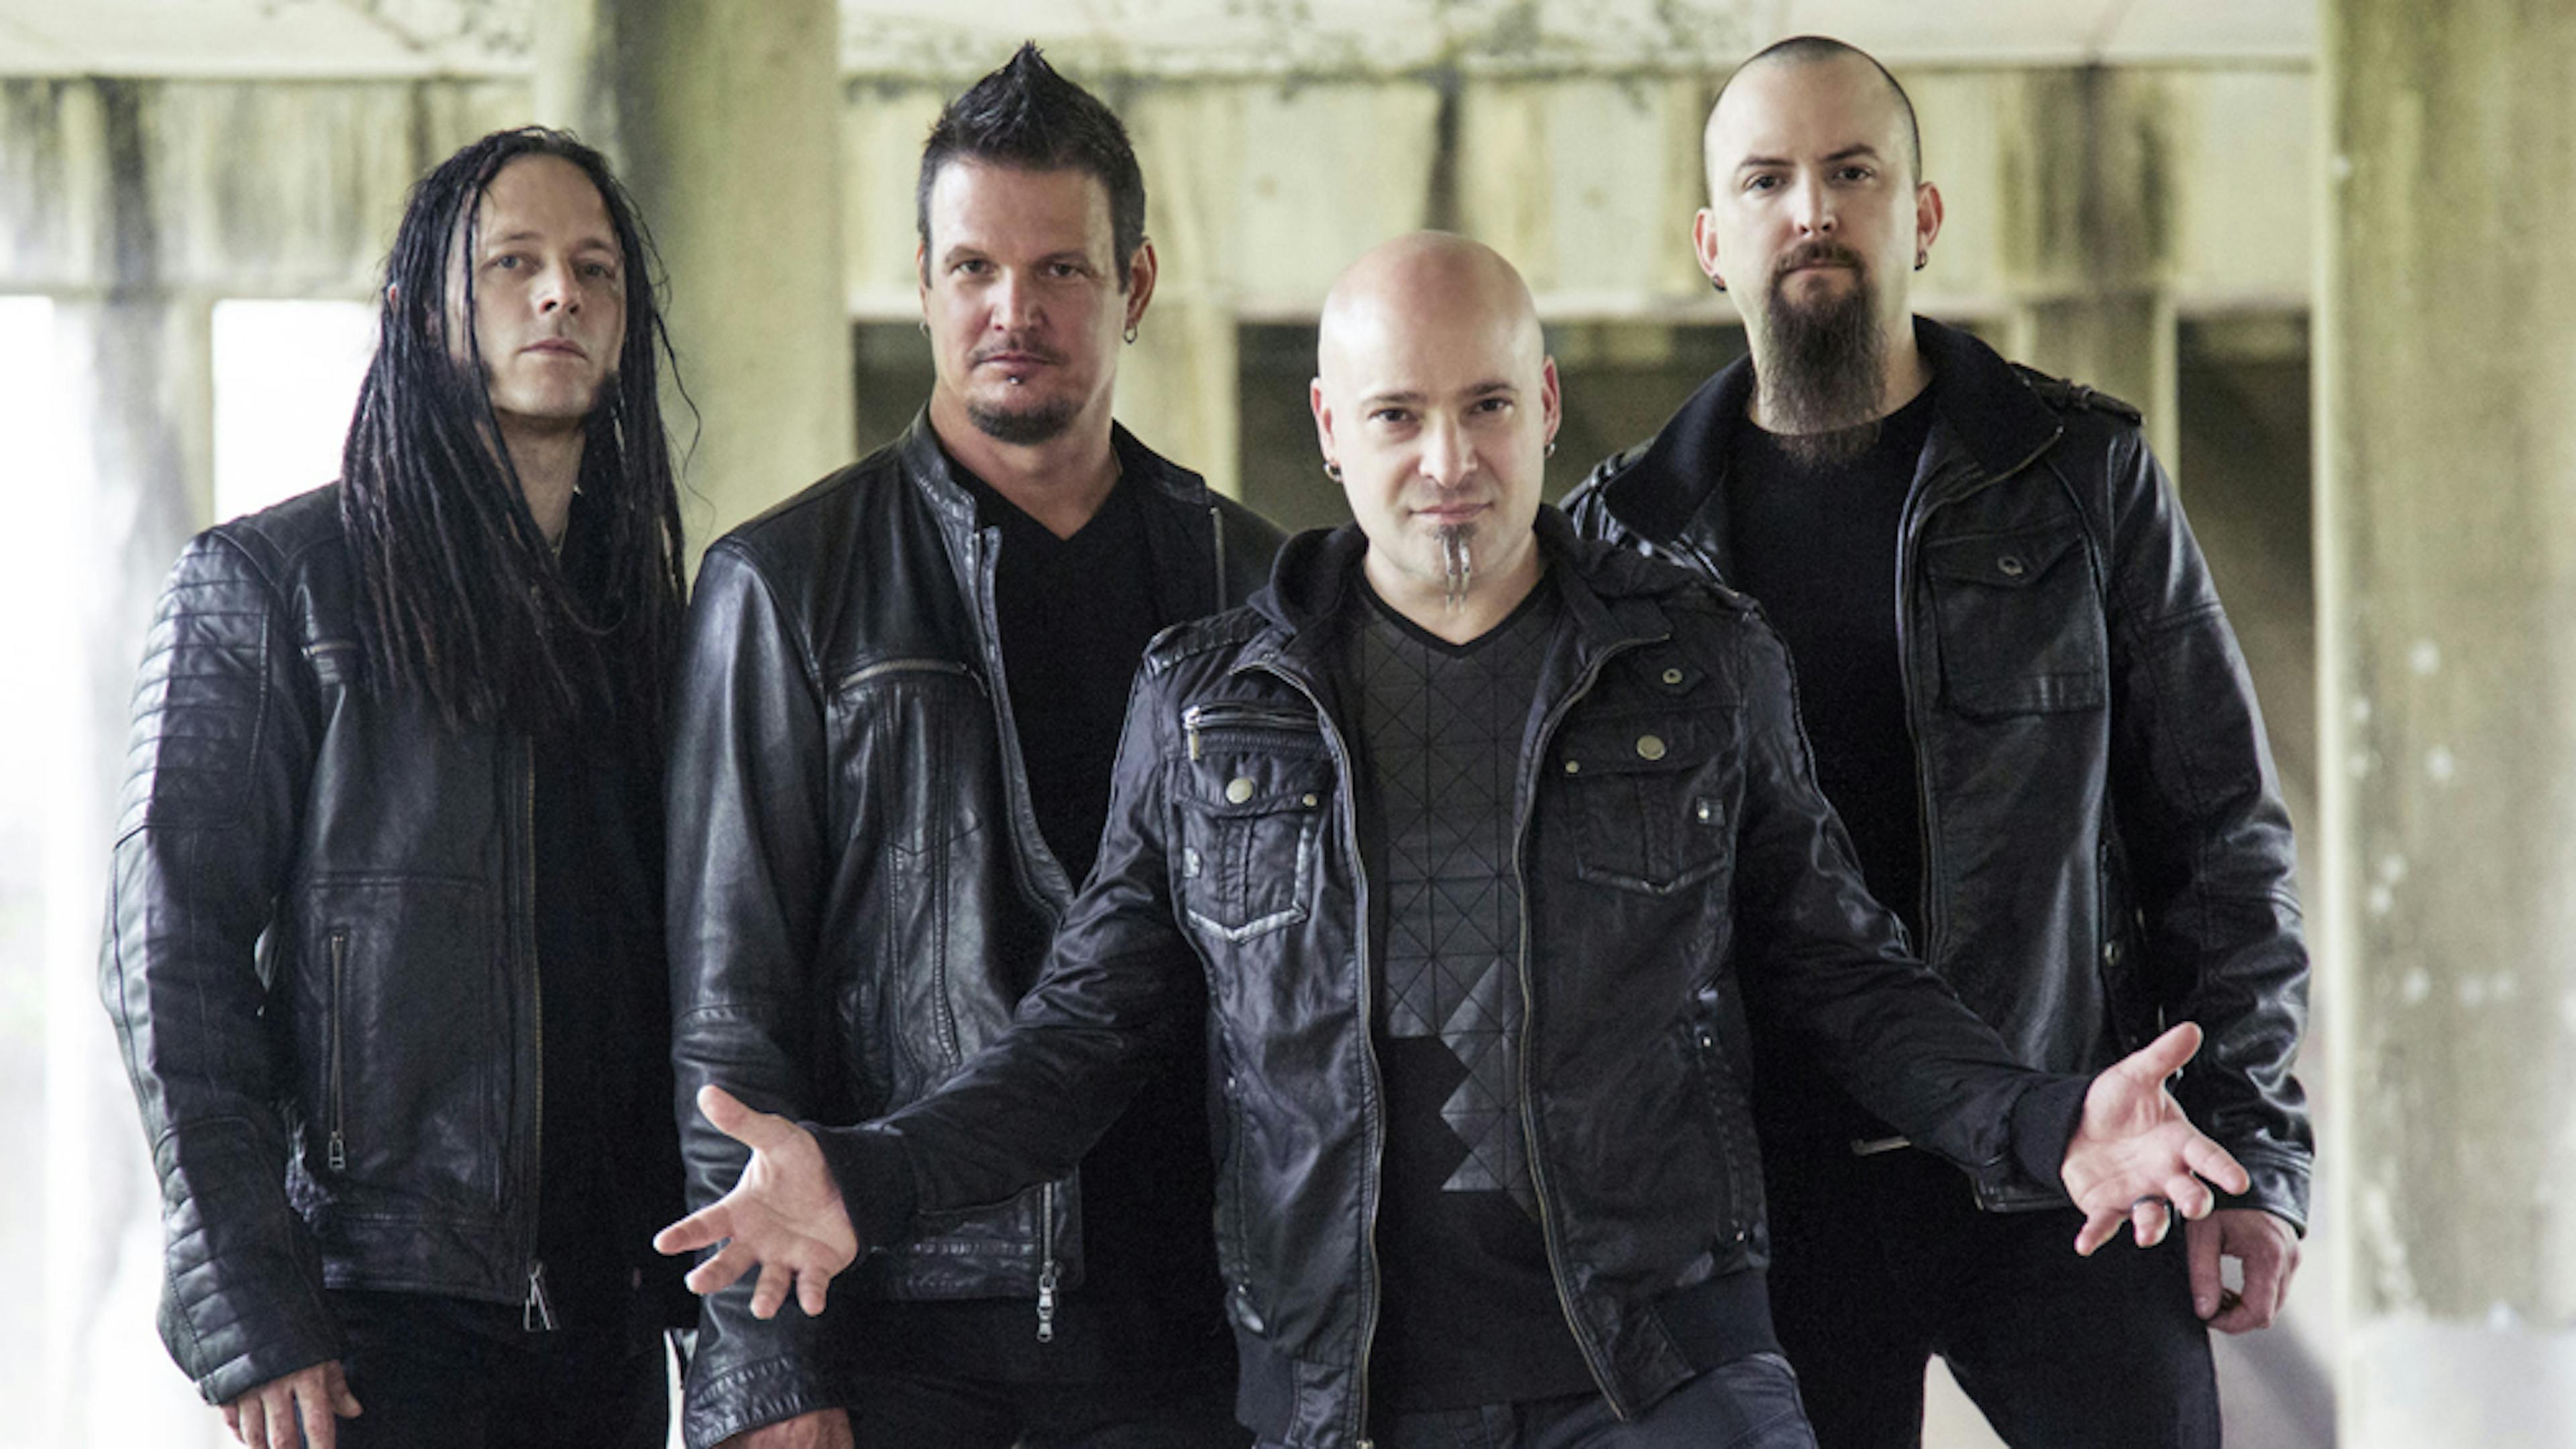 Disturbed Have Been Working On New Music In Lockdown